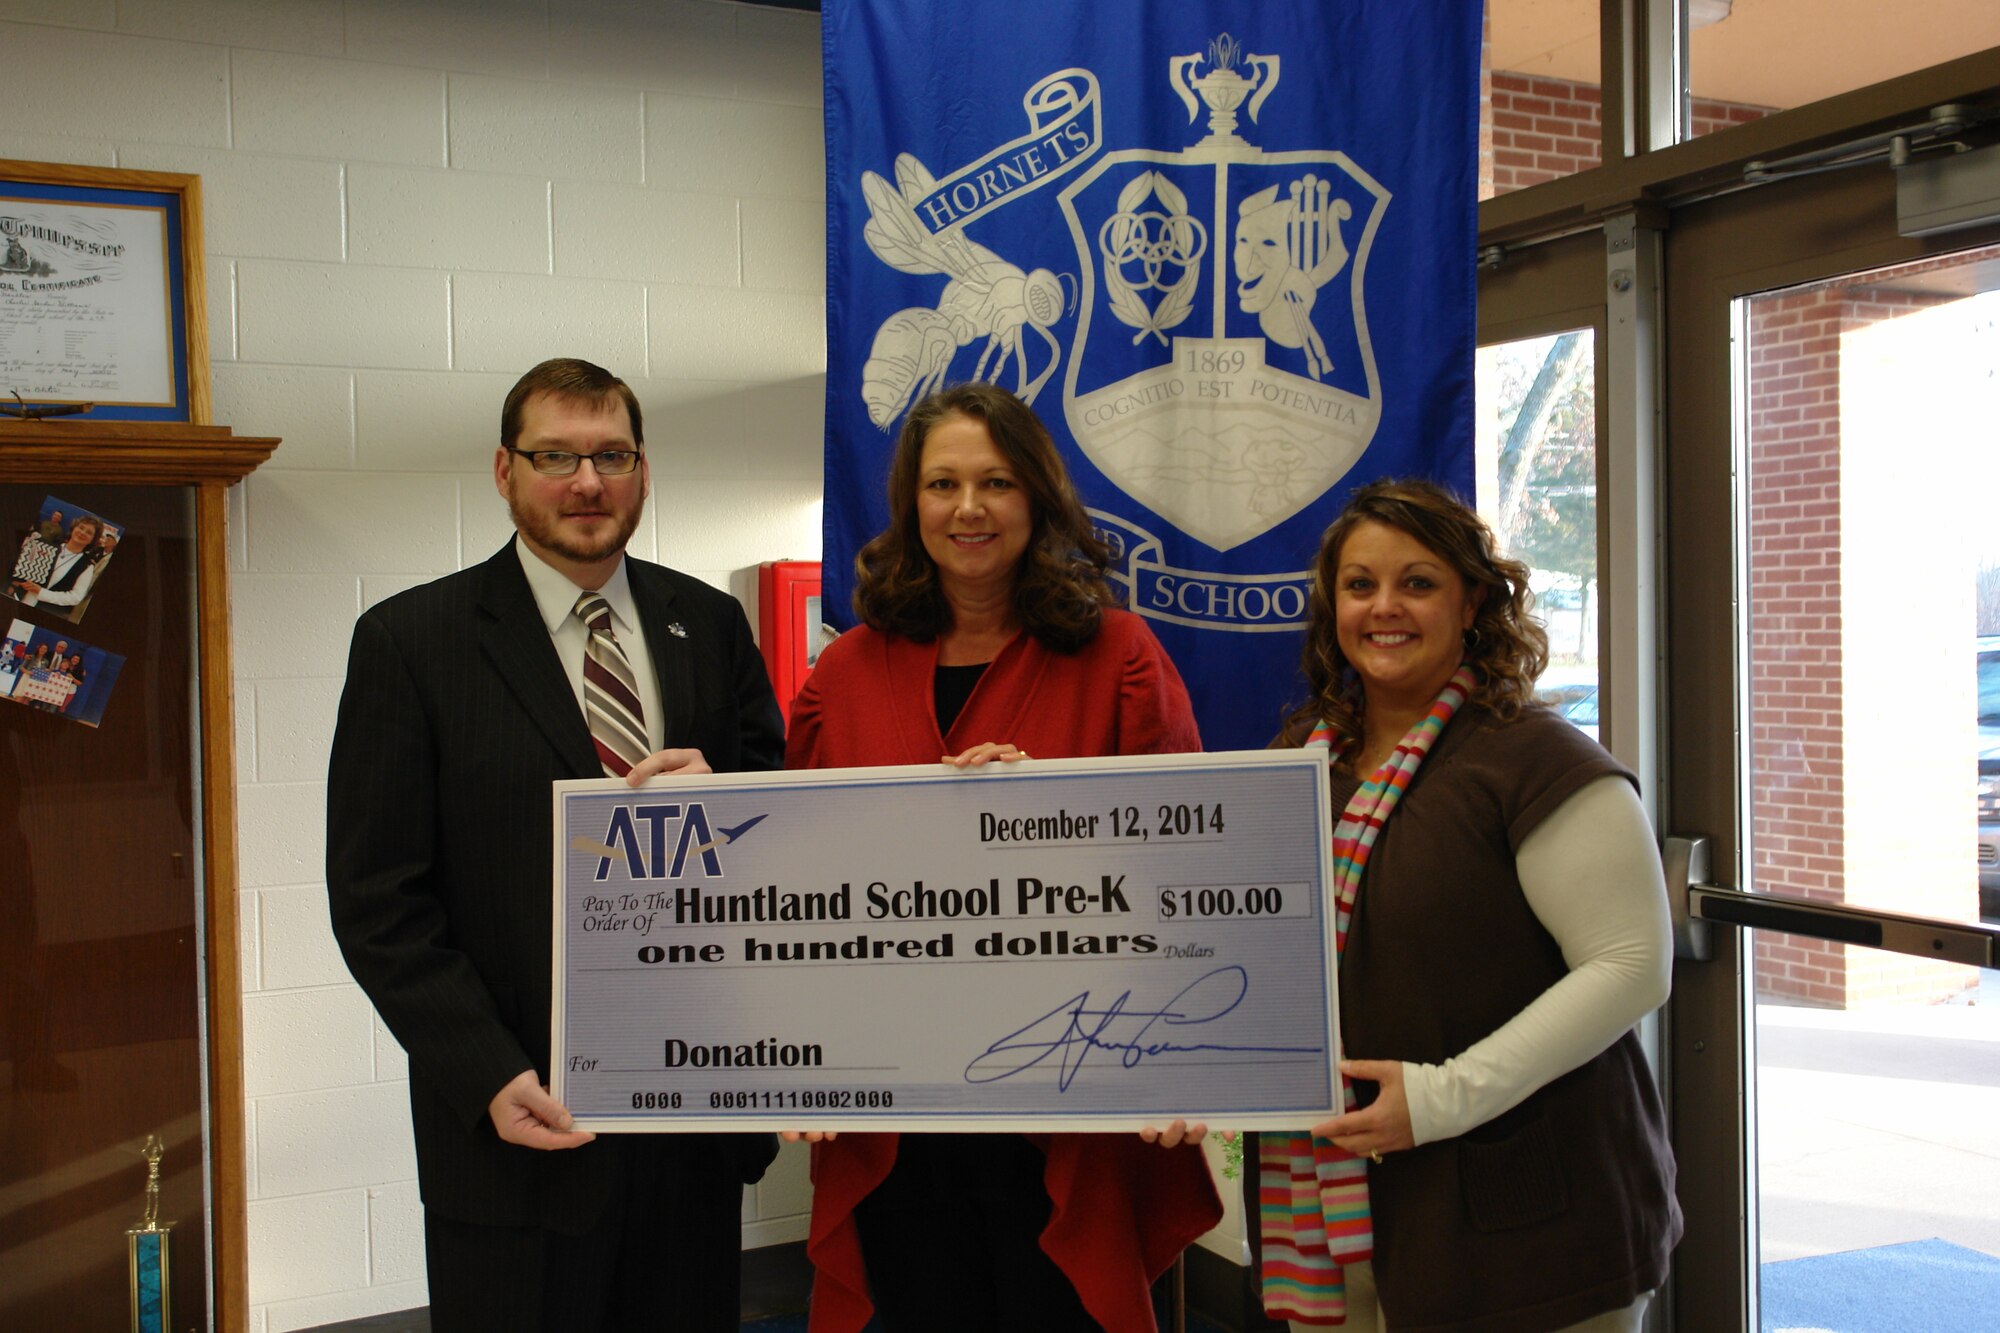 The Huntland School Pre-K department recently received a $100 donation from the Aerospace Testing Alliance (ATA) Employee and Community Activities Committee (E&CAC) for the Hatch iStartSmart App. With iStartSmart, students can engage in activities that develop readiness skills, teachers can access individual progress reports and parents can view progress in 18 skills areas. Pre-K Teacher Carlene Tucker (center) and Principal William Bishop II (left) accept the donation check from ATA E&CAC committee member Andrea Stephens. (Photo by J.C. Stephens)